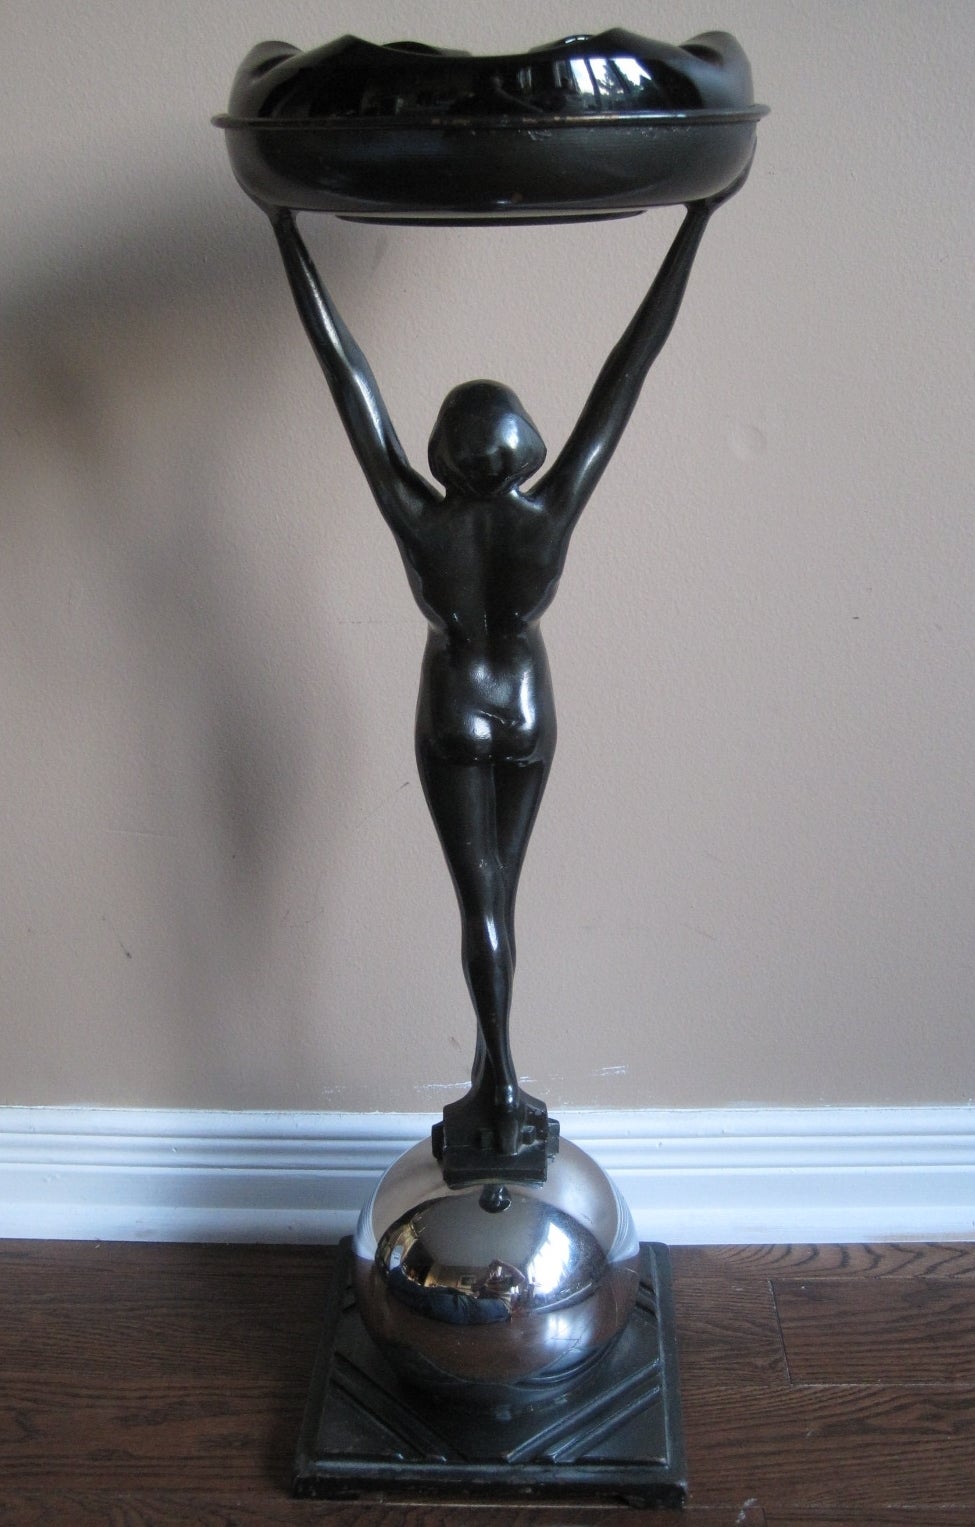 Frankart Nude Art Deco Smoke/Ashtray Stand

Figural Nude Smoking stand with cast iron base, chrome ball and original glass ashtray.

Free shipping within the United States and Canada.